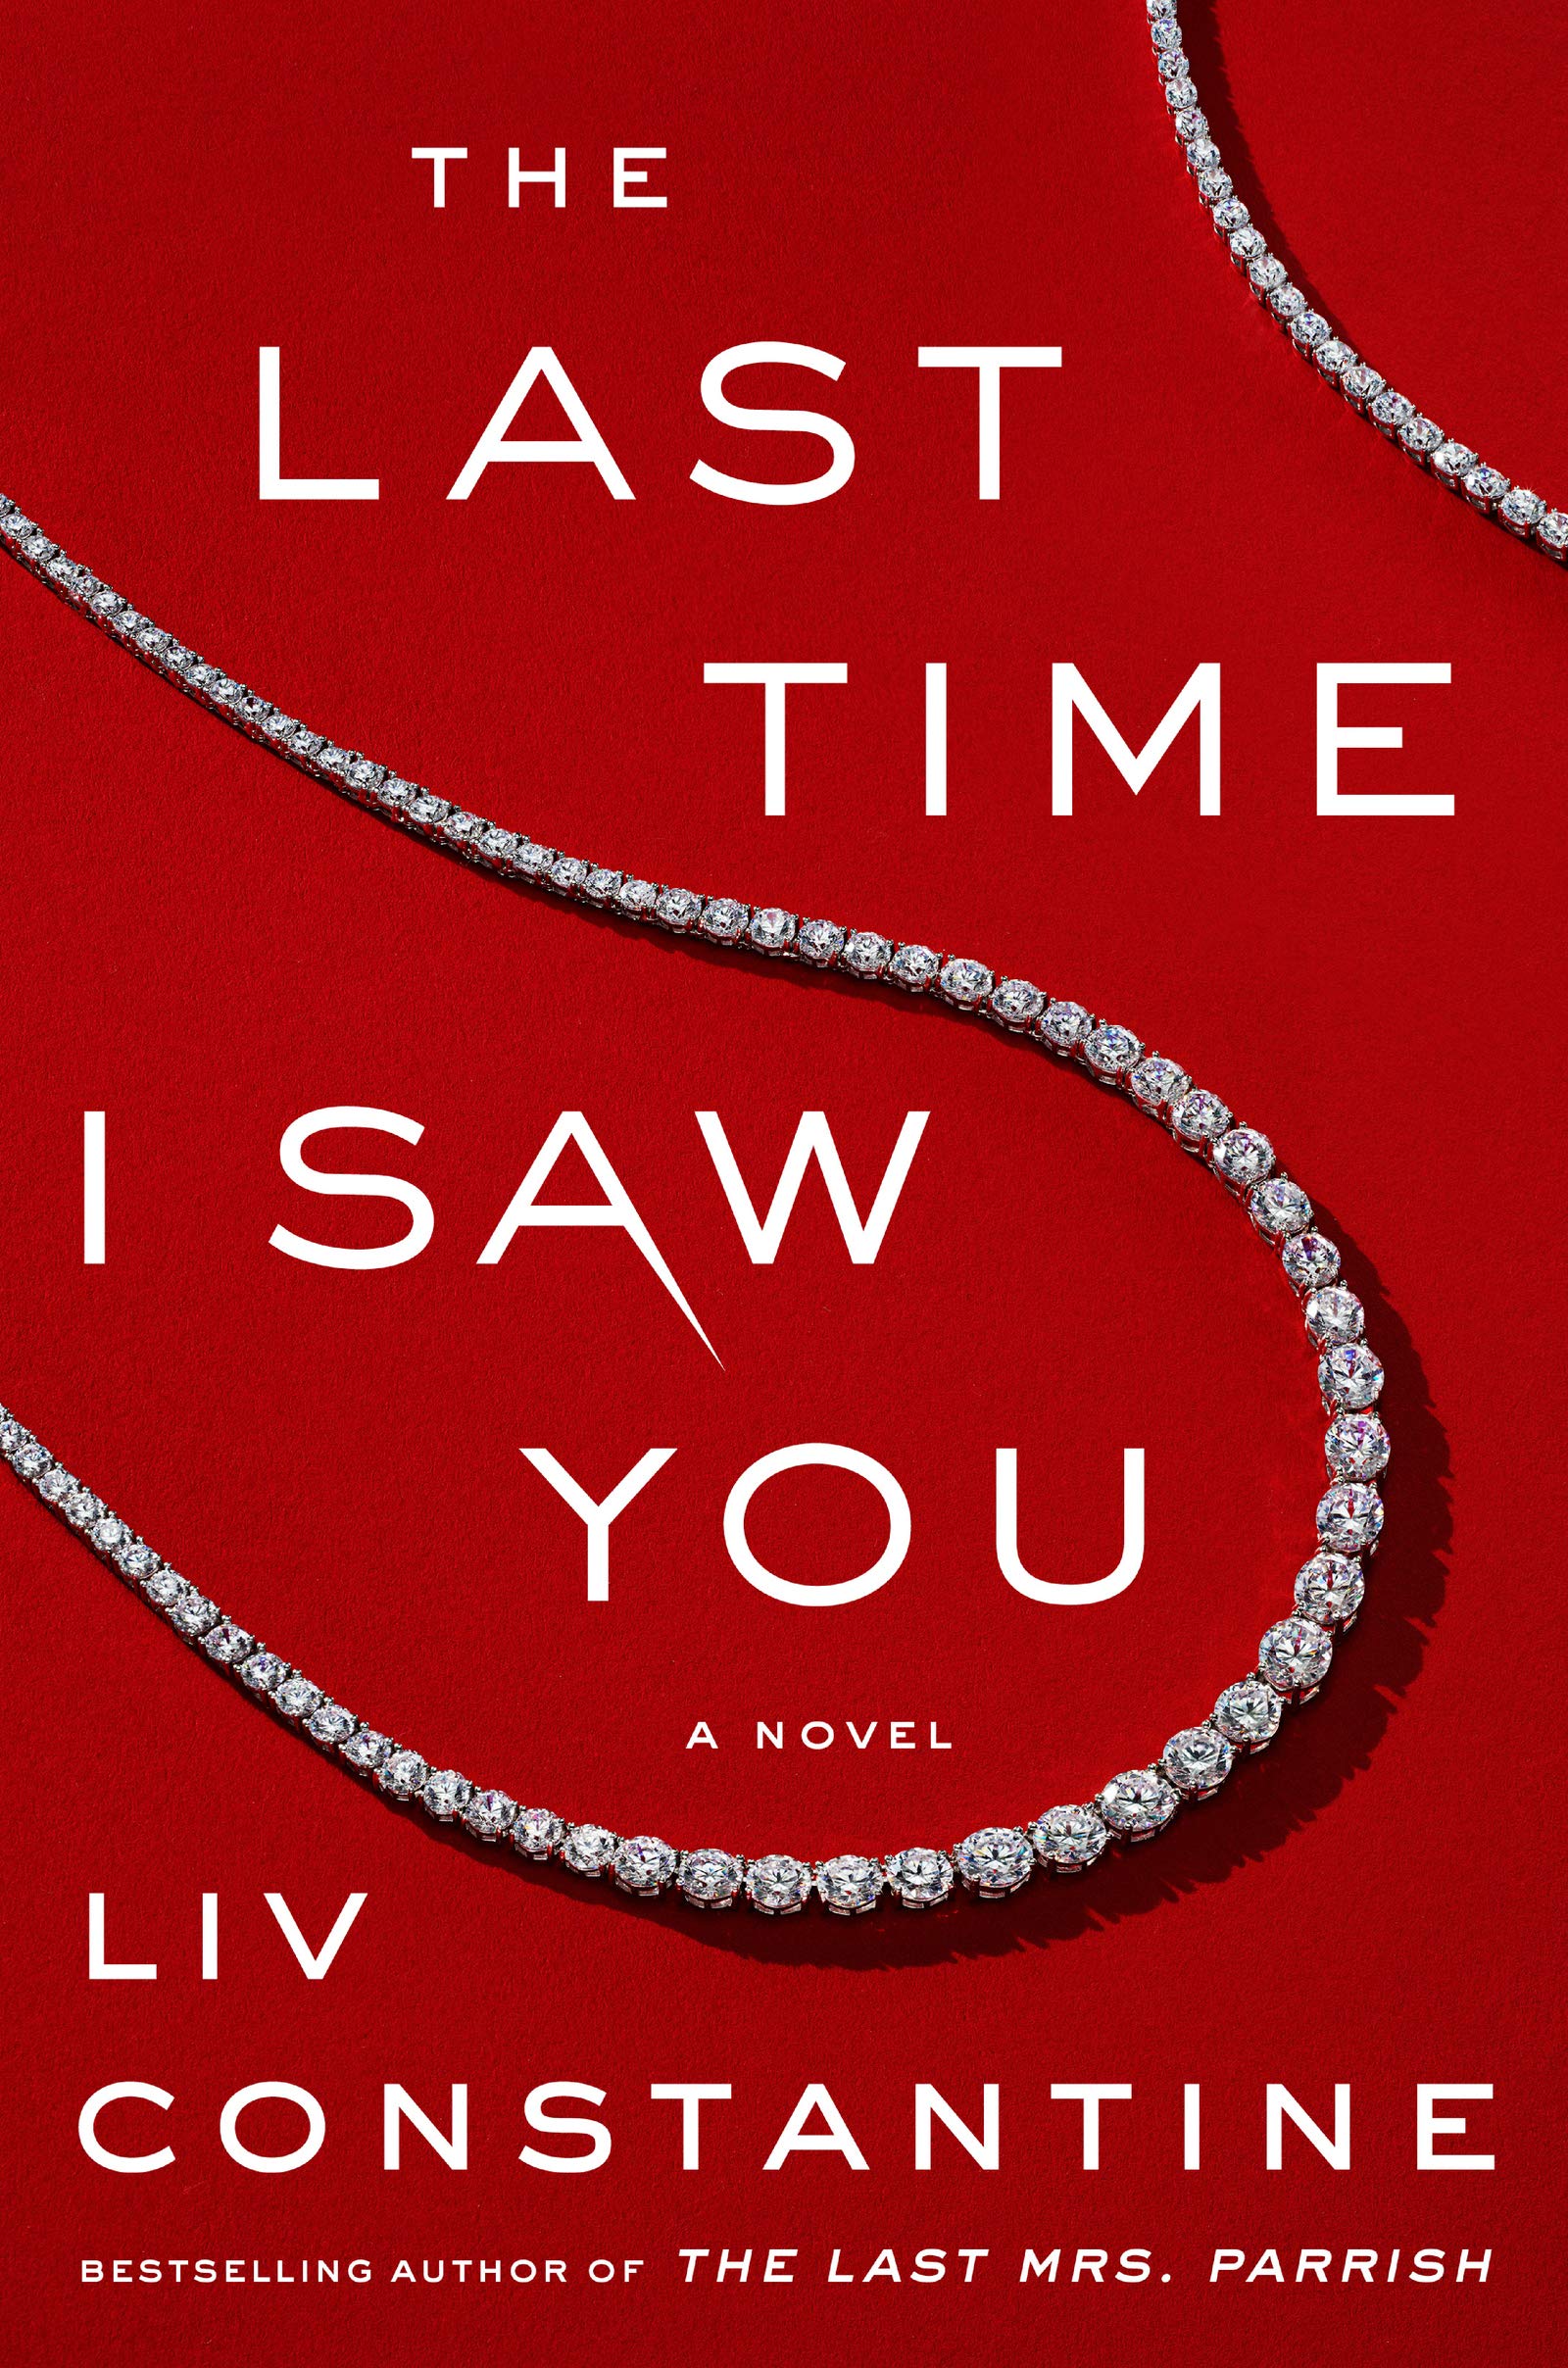 Best Spring Break Reads: The Last Time I Saw You